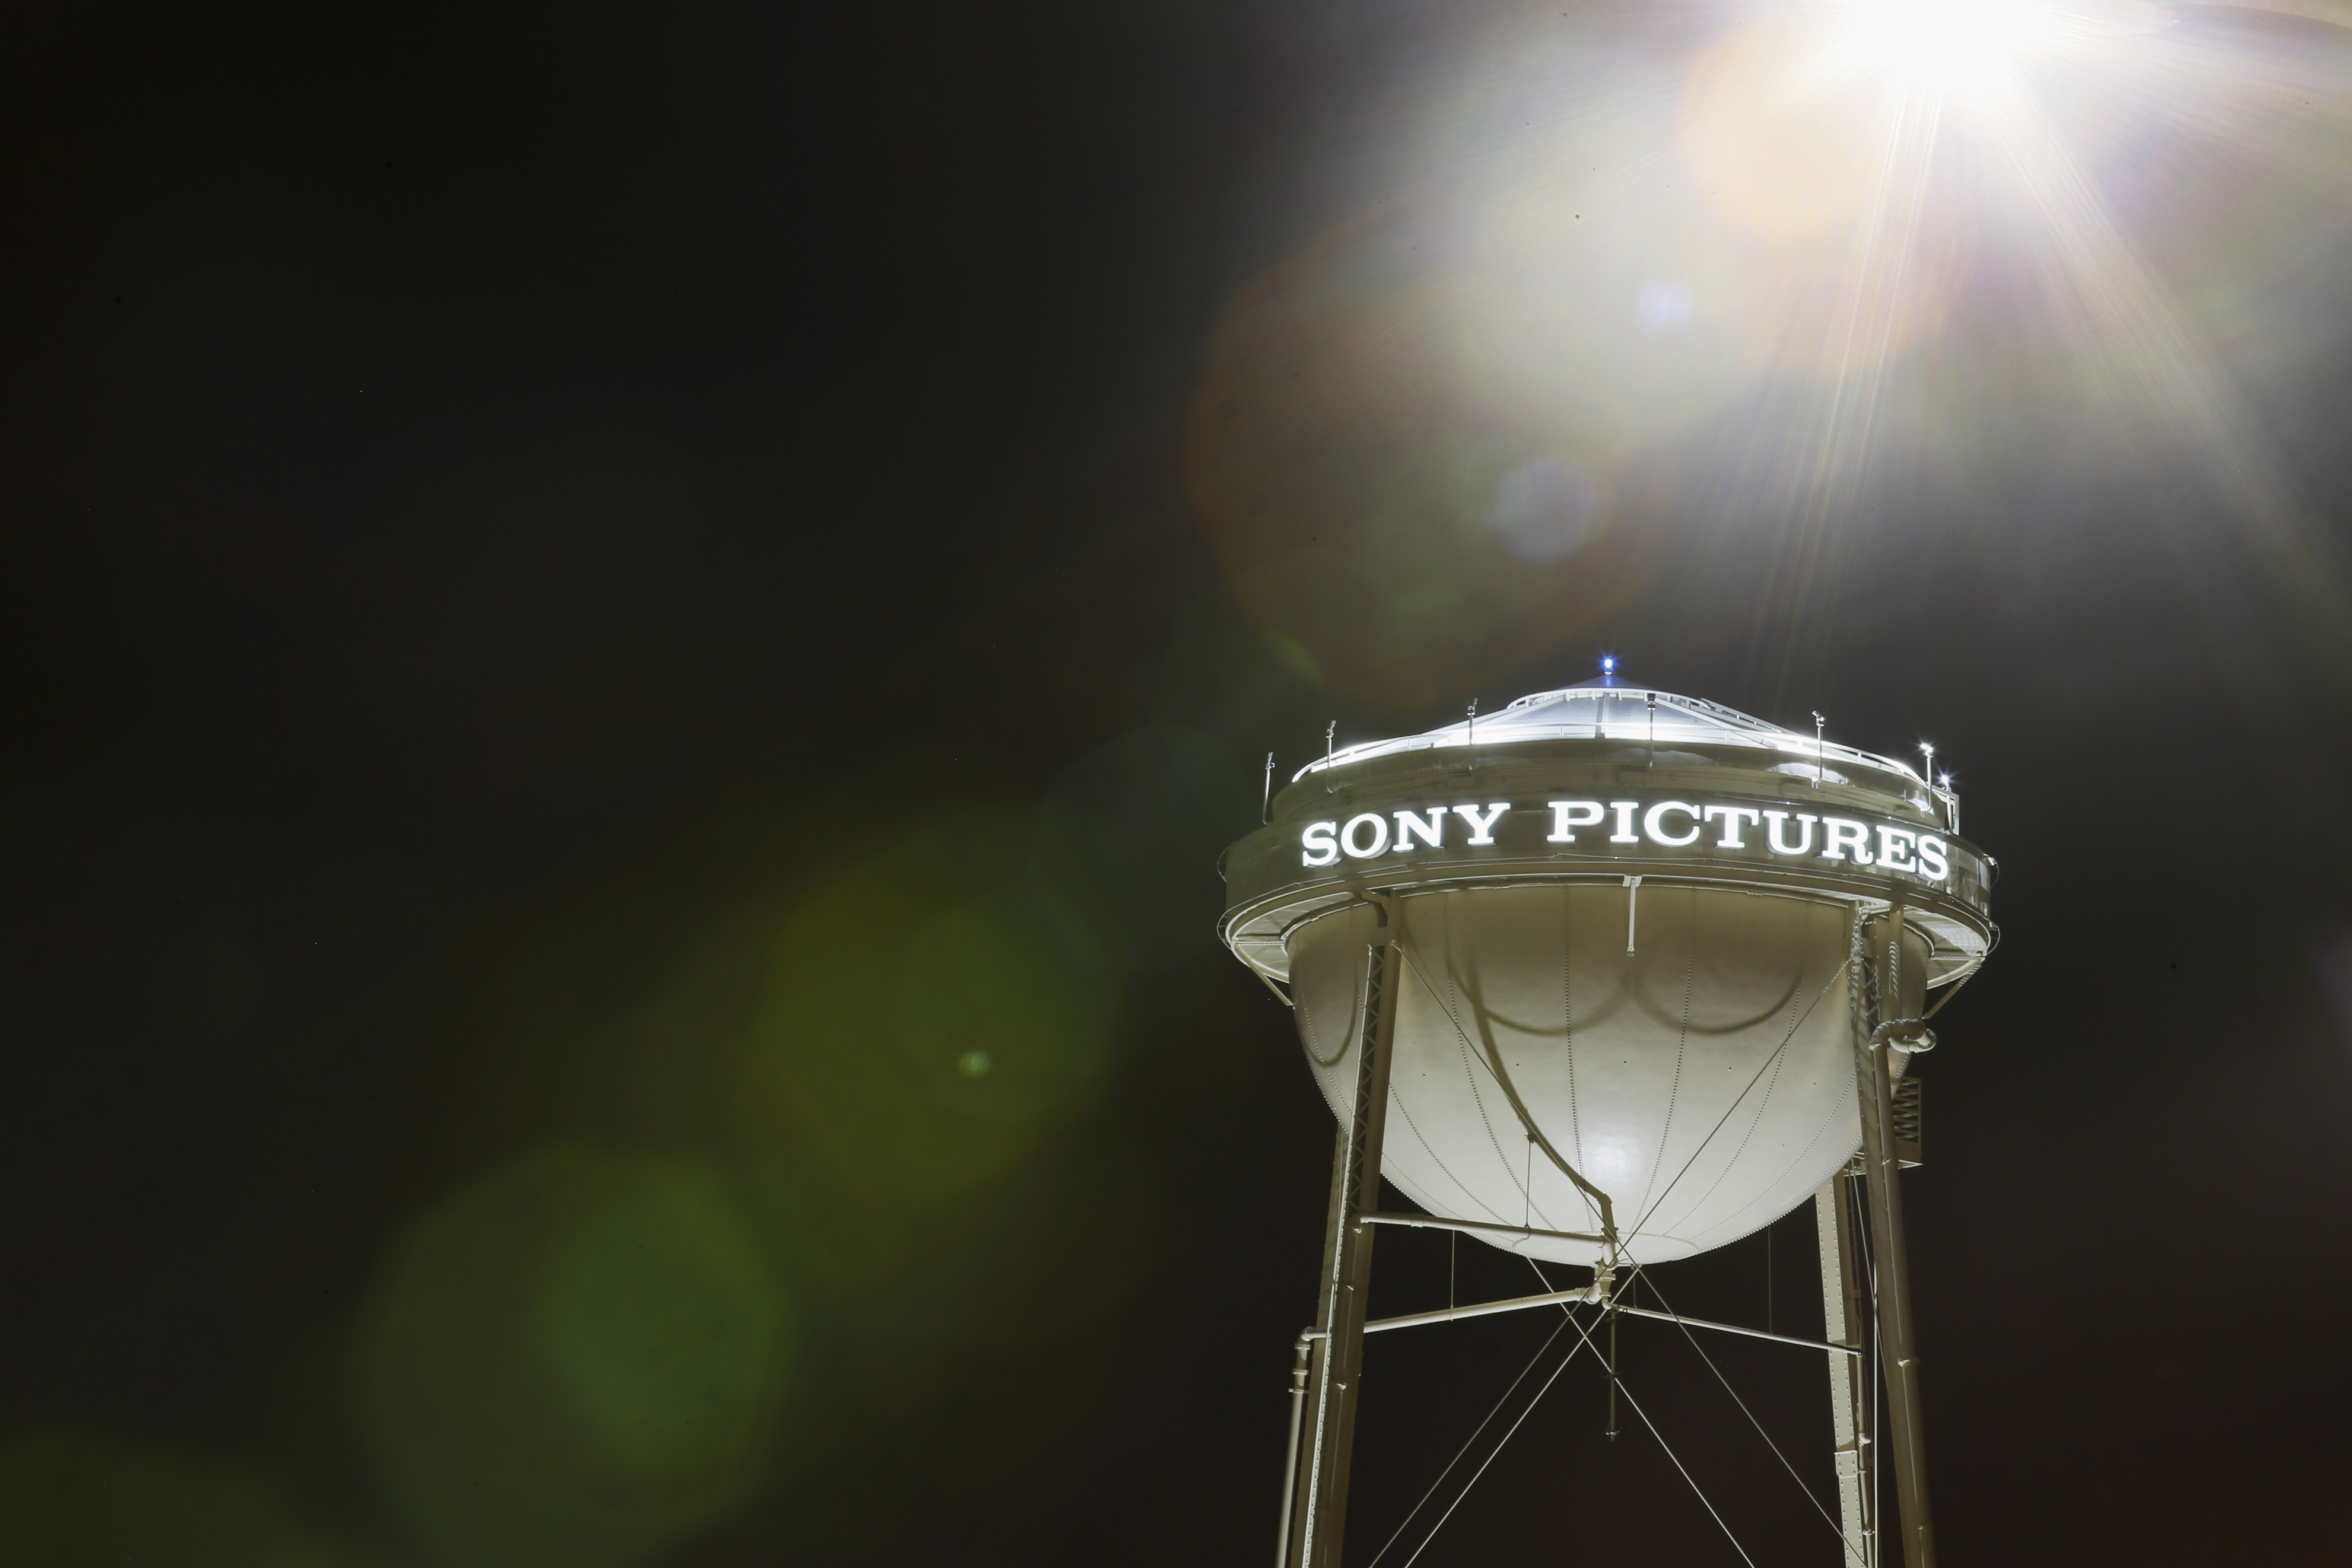 The water tower at the Sony Pictures Entertainment Inc. studios in Culver City, Calif., Dec. 18, 2014 (Bloomberg—Bloomberg/Getty Images)